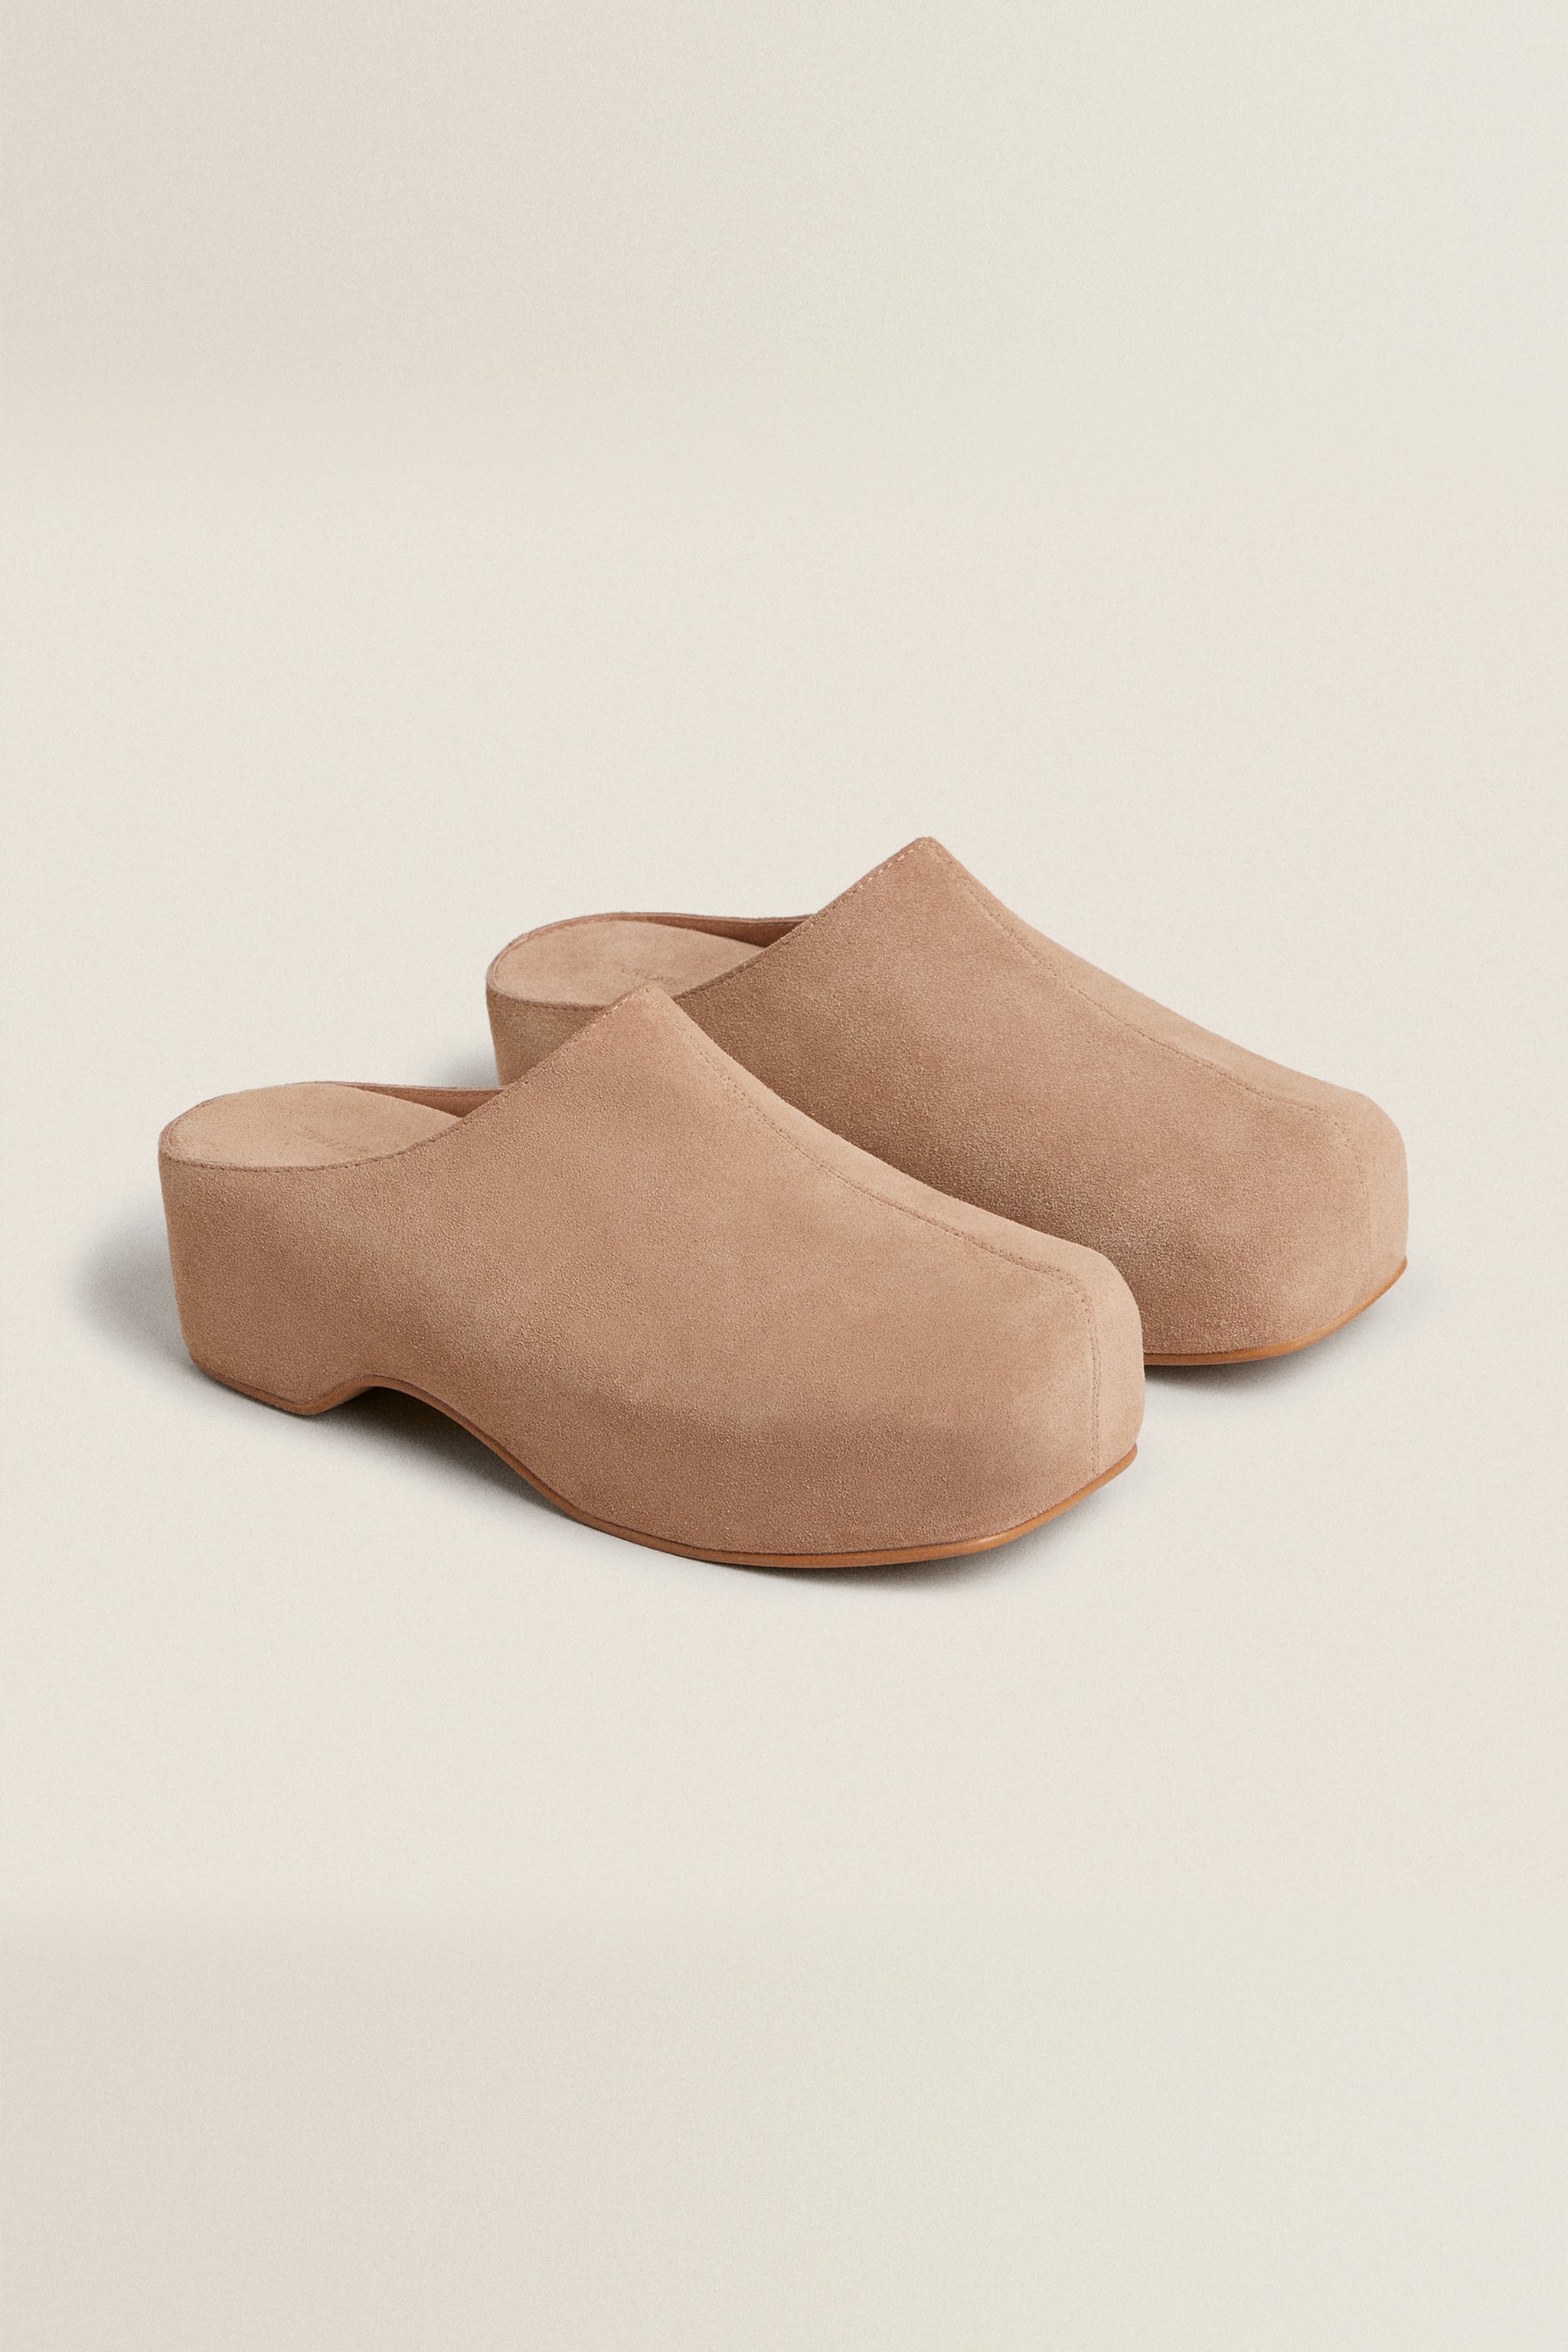 LEATHER MULE CLOG SLIPPERS